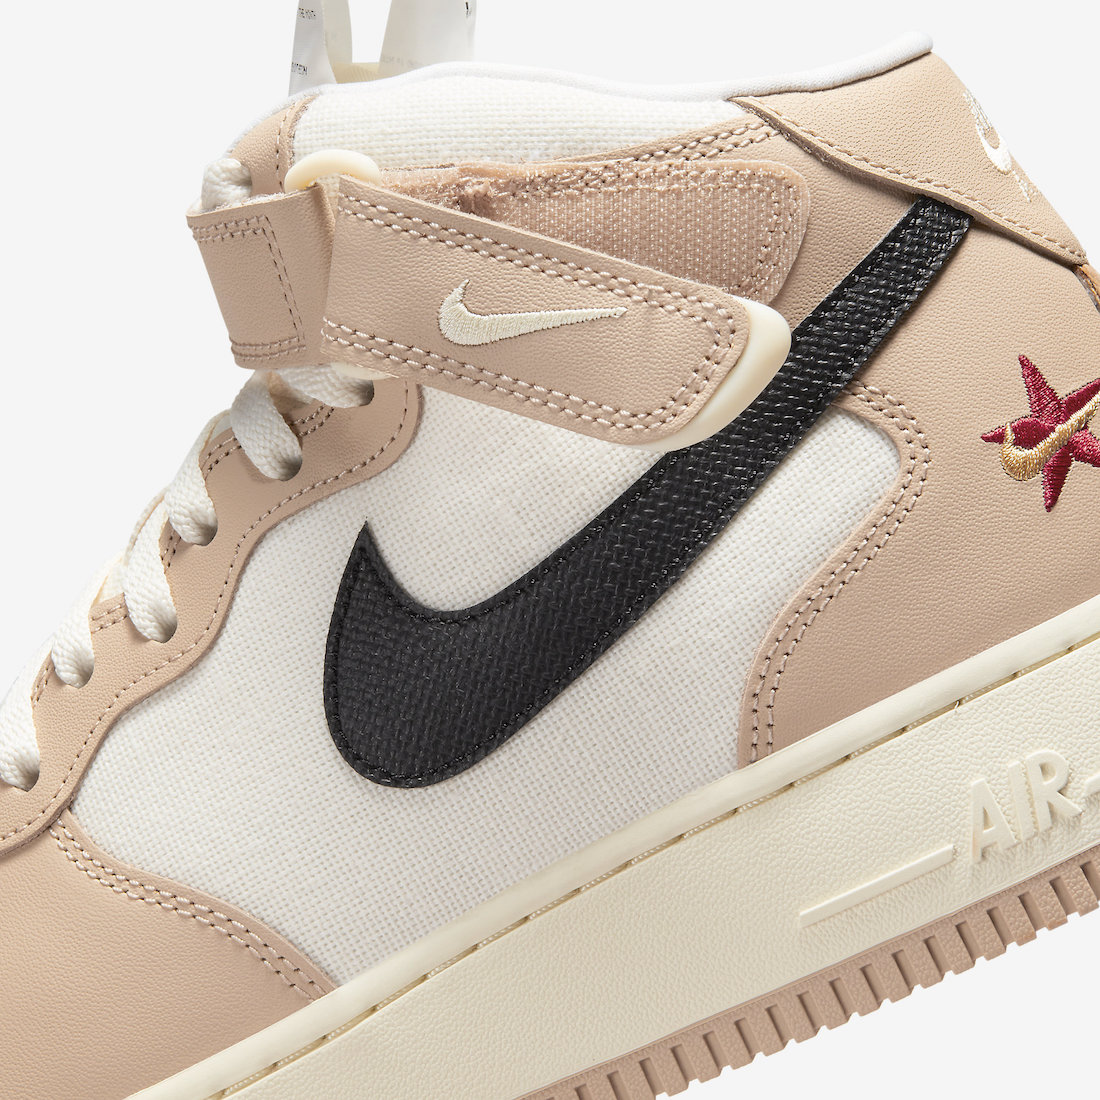 Nike Air Force 1 Mid Timeline DX2938-200 Release Date